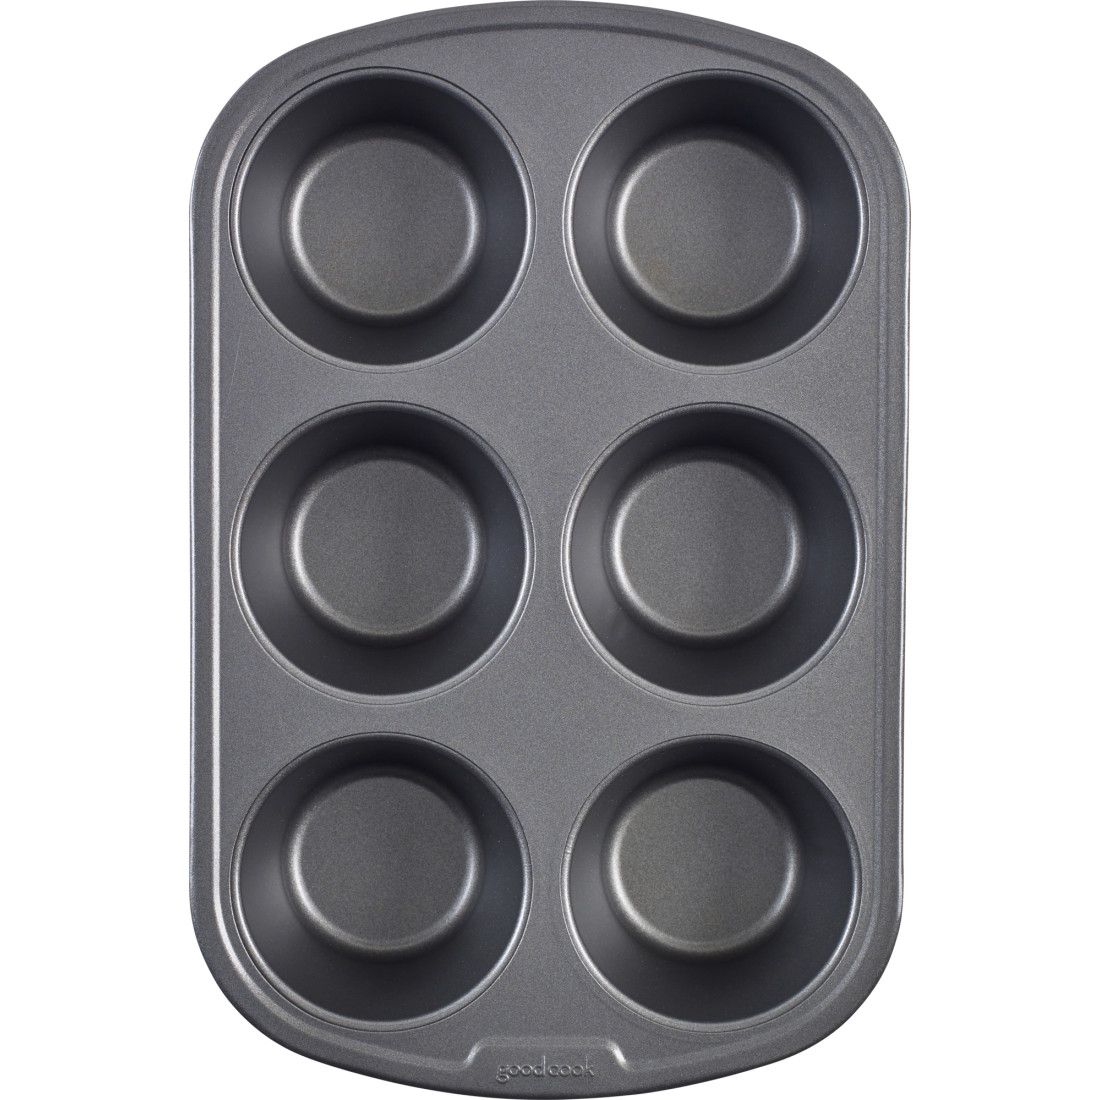 CANDeal Jumbo Deep Muffin Tin - 6-Cup 3.5-Inch Muffin Pan, Carbon Steel  with Non-Stick Coating - Golden Bakeware - Extra Large Cupcake Tins for  Baking